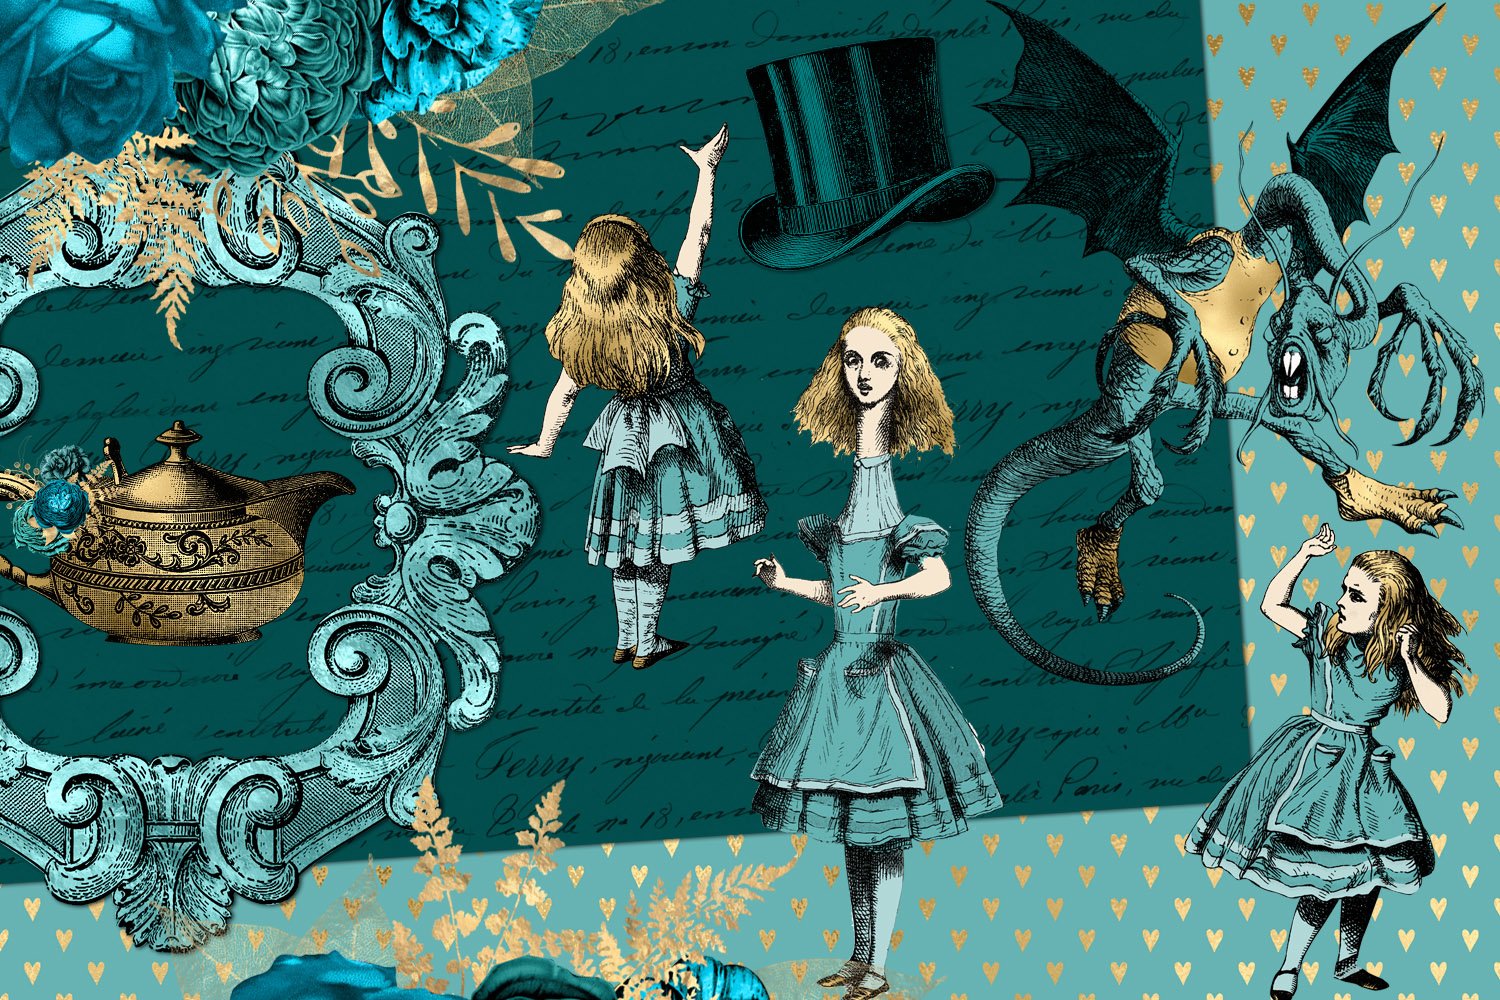 An image with Alice in green.